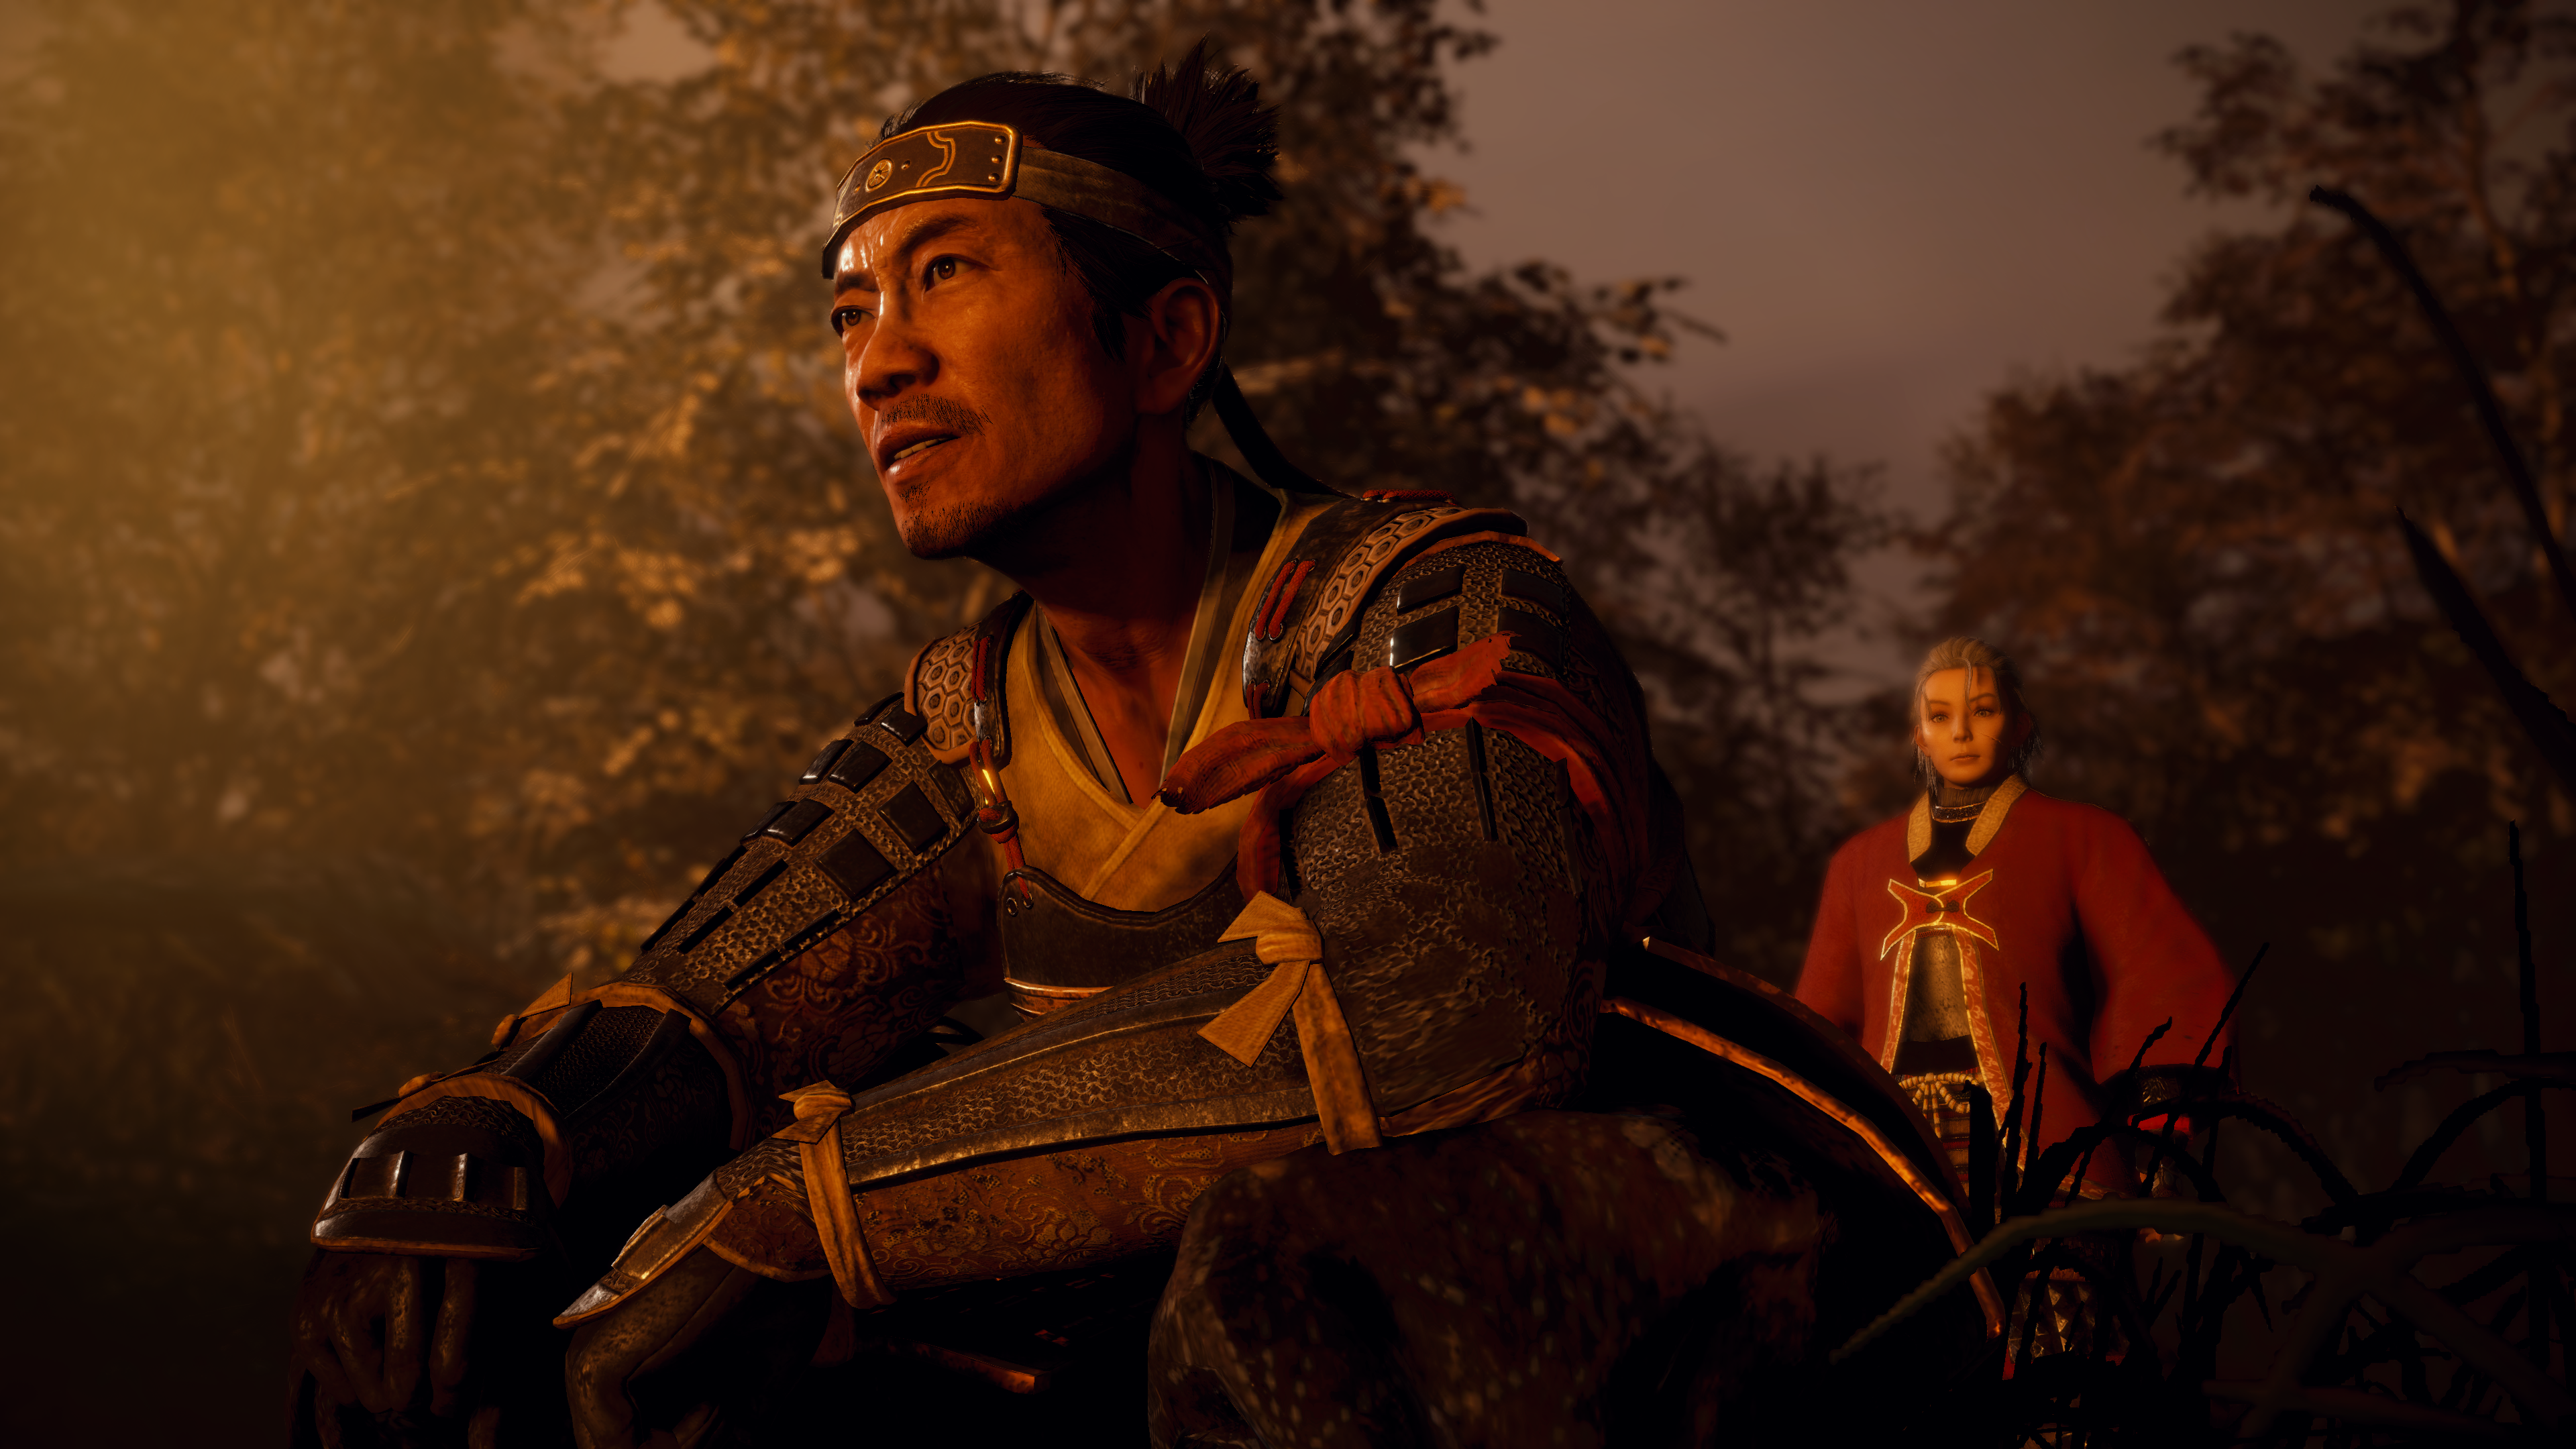 Ghost of Tsushima: System requirements